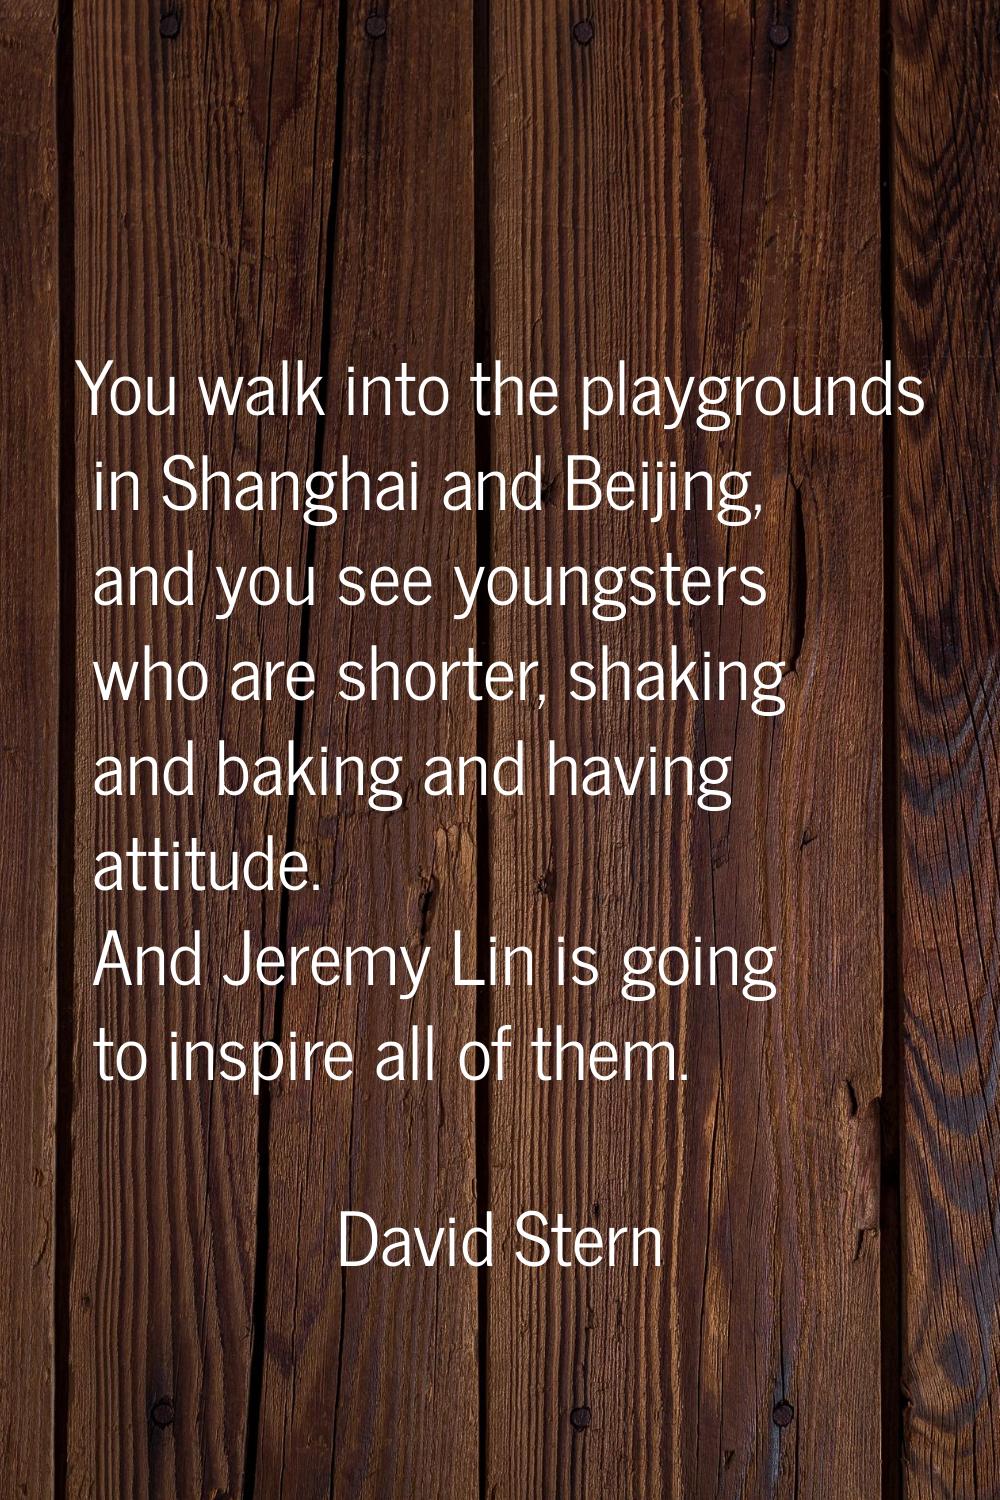 You walk into the playgrounds in Shanghai and Beijing, and you see youngsters who are shorter, shak